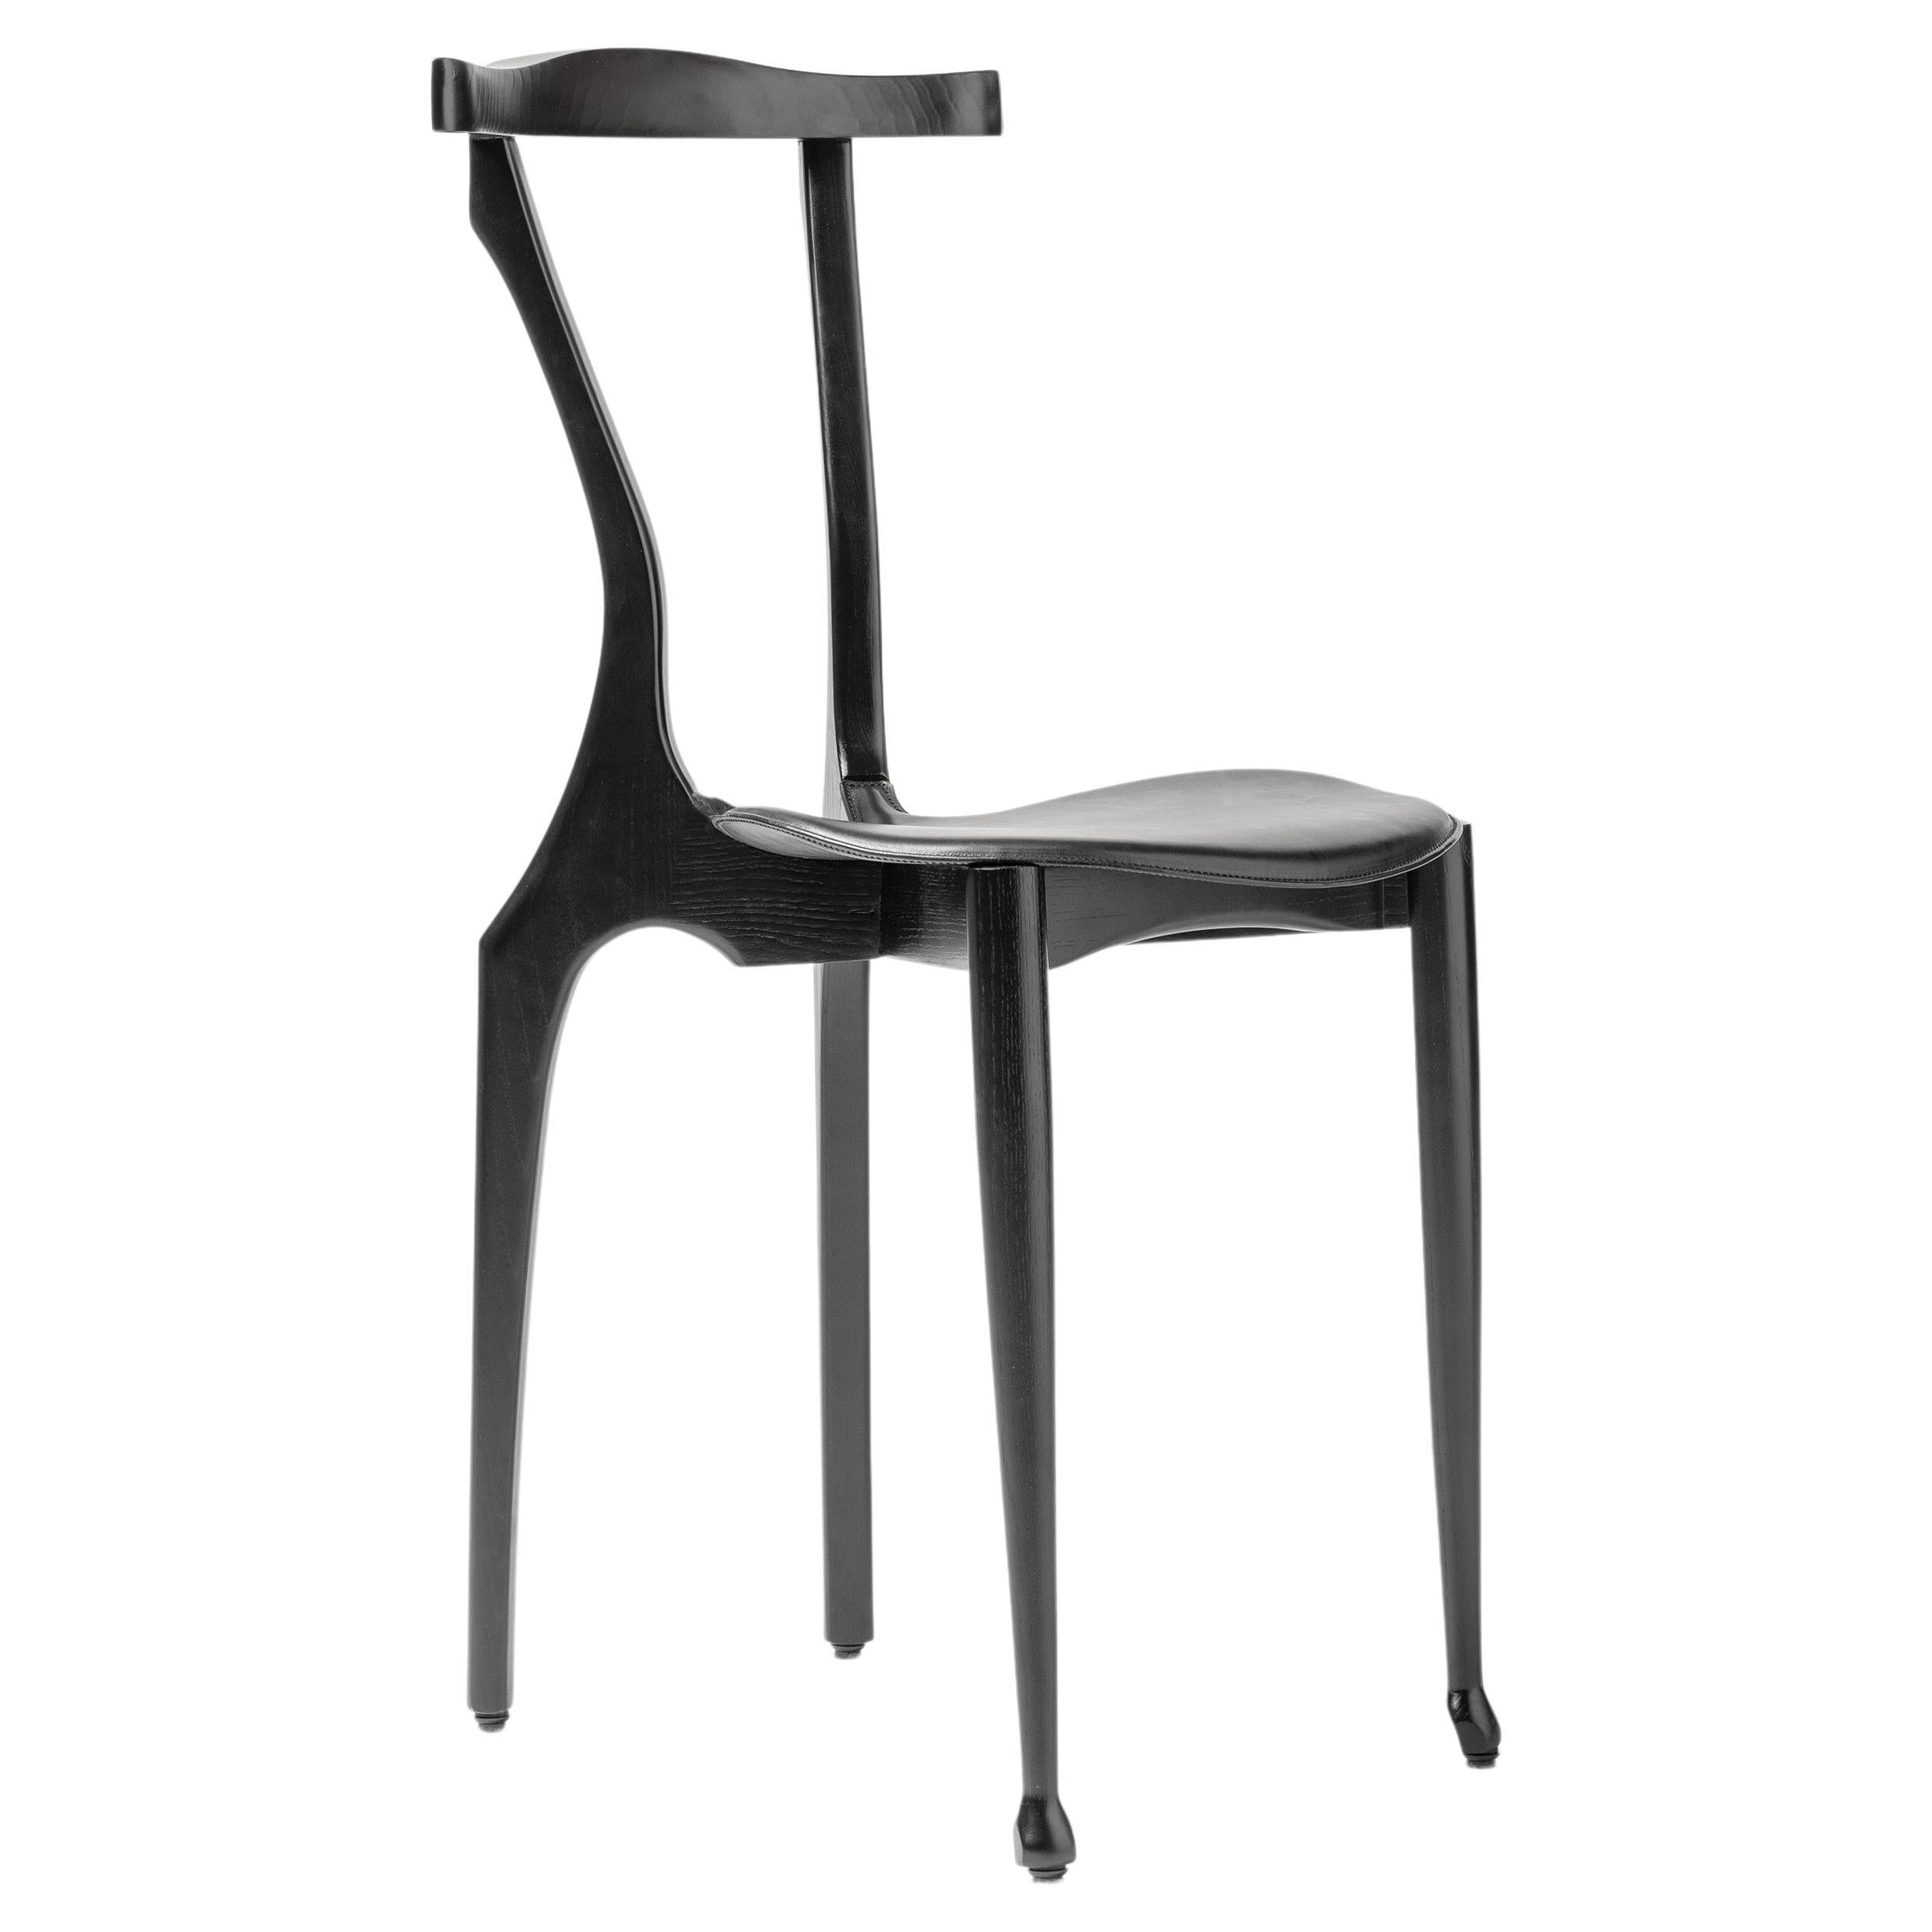 "Gaulinetta" Dining Chair Lacquered Black Ash Wood, Contemporary Spanish Design For Sale